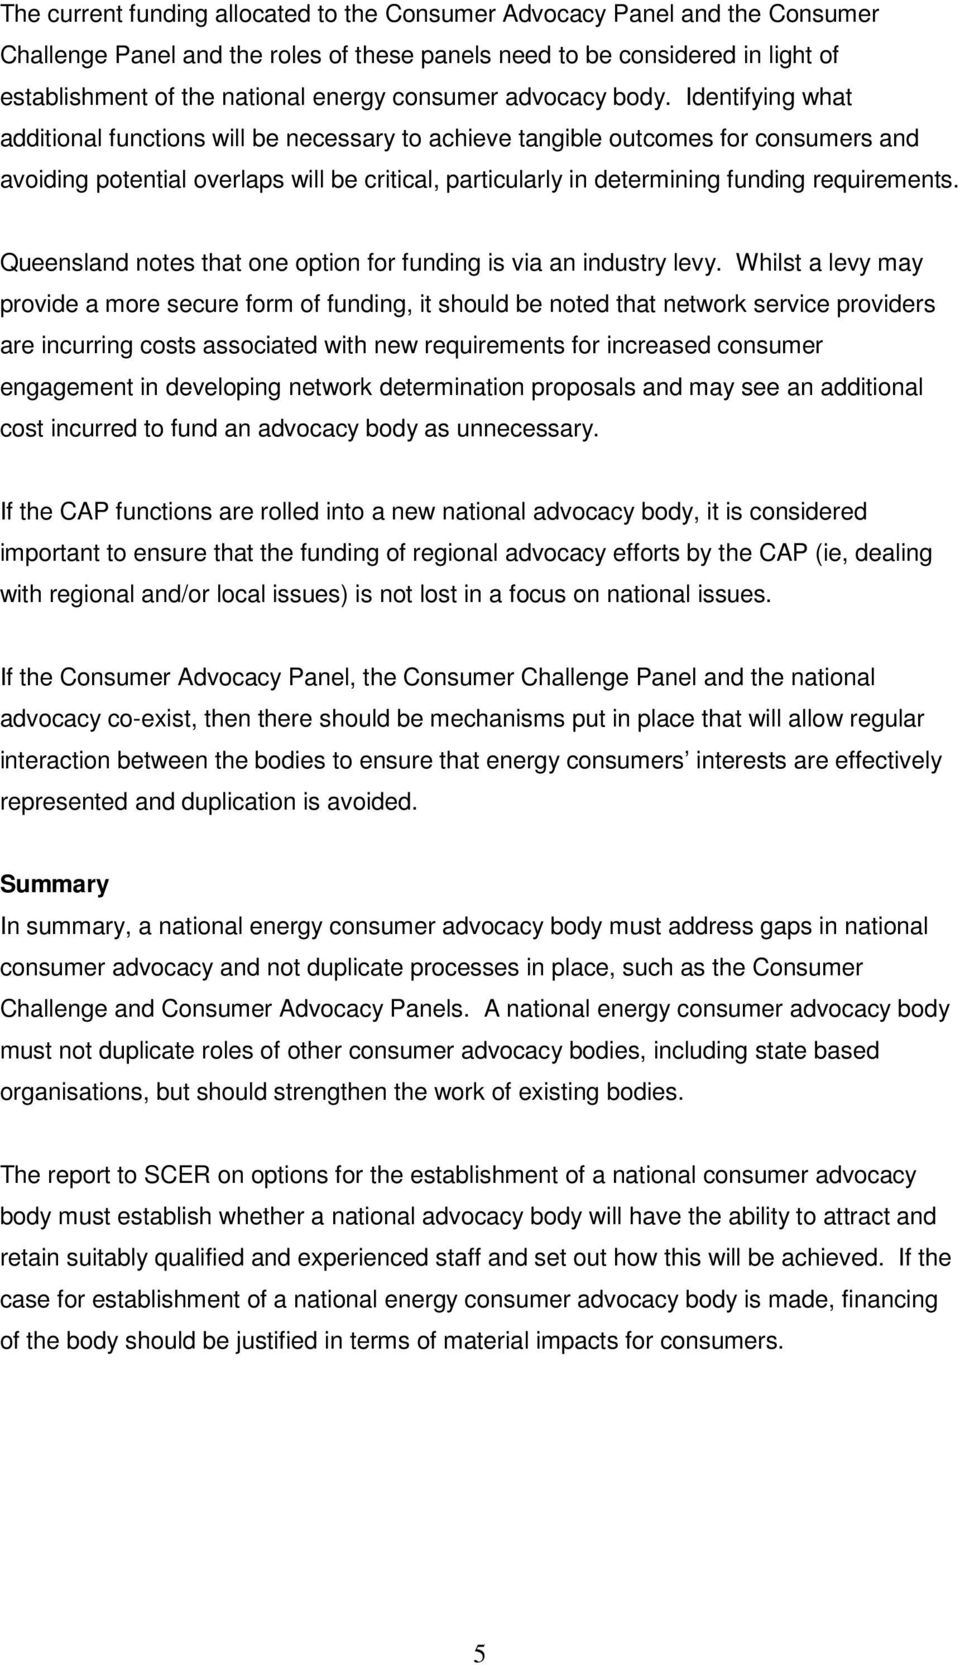 Identifying what additional functions will be necessary to achieve tangible outcomes for consumers and avoiding potential overlaps will be critical, particularly in determining funding requirements.